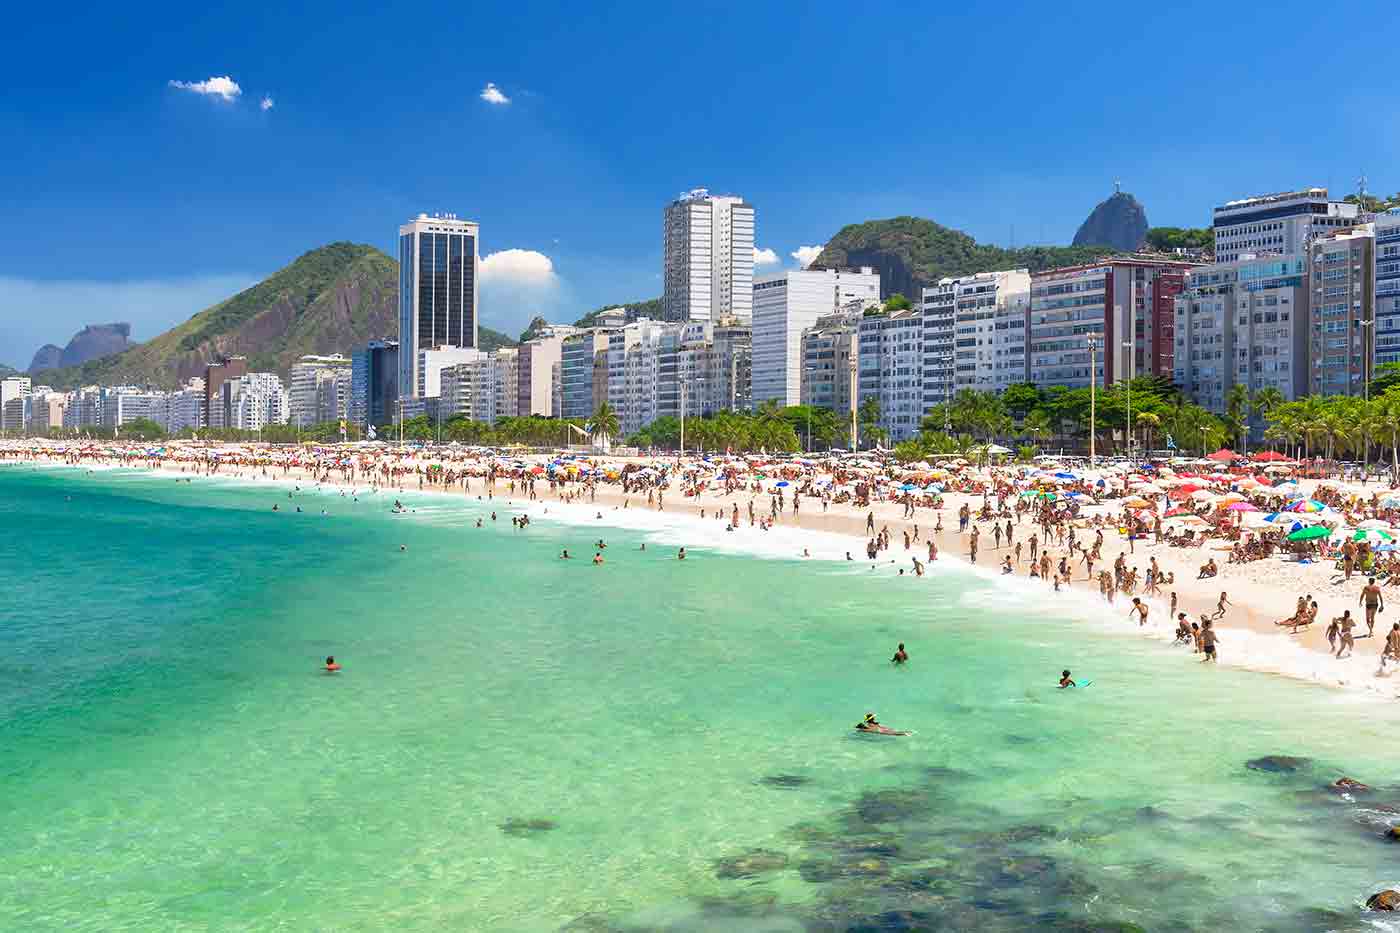 what is the tourism in rio de janeiro